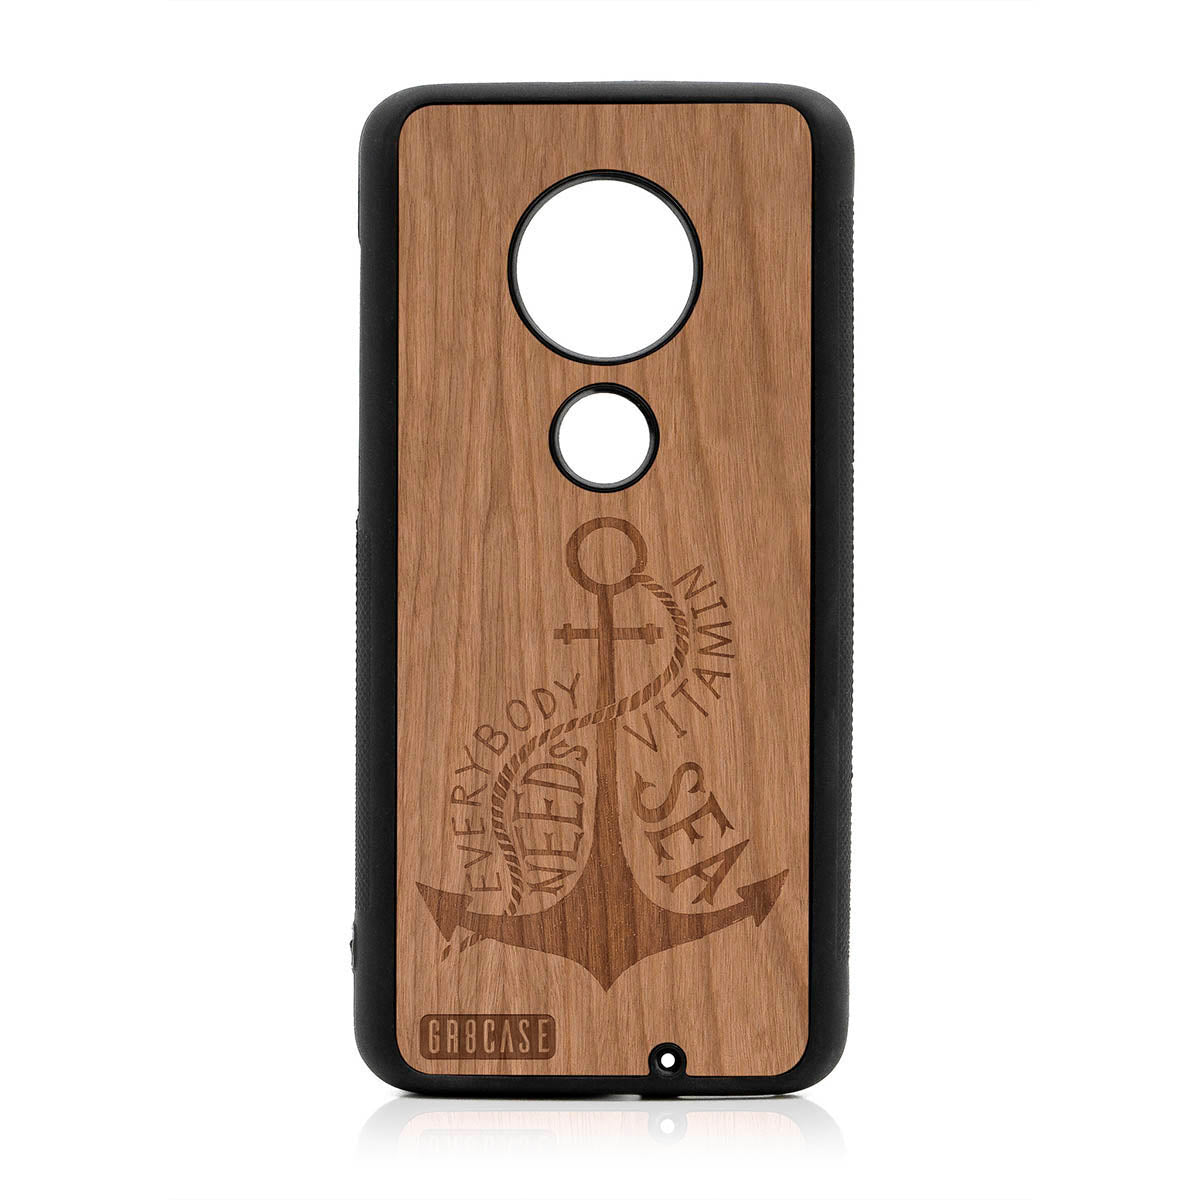 Everybody Needs Vitamin Sea (Anchor) Design Wood Case For Moto G7 Plus by GR8CASE